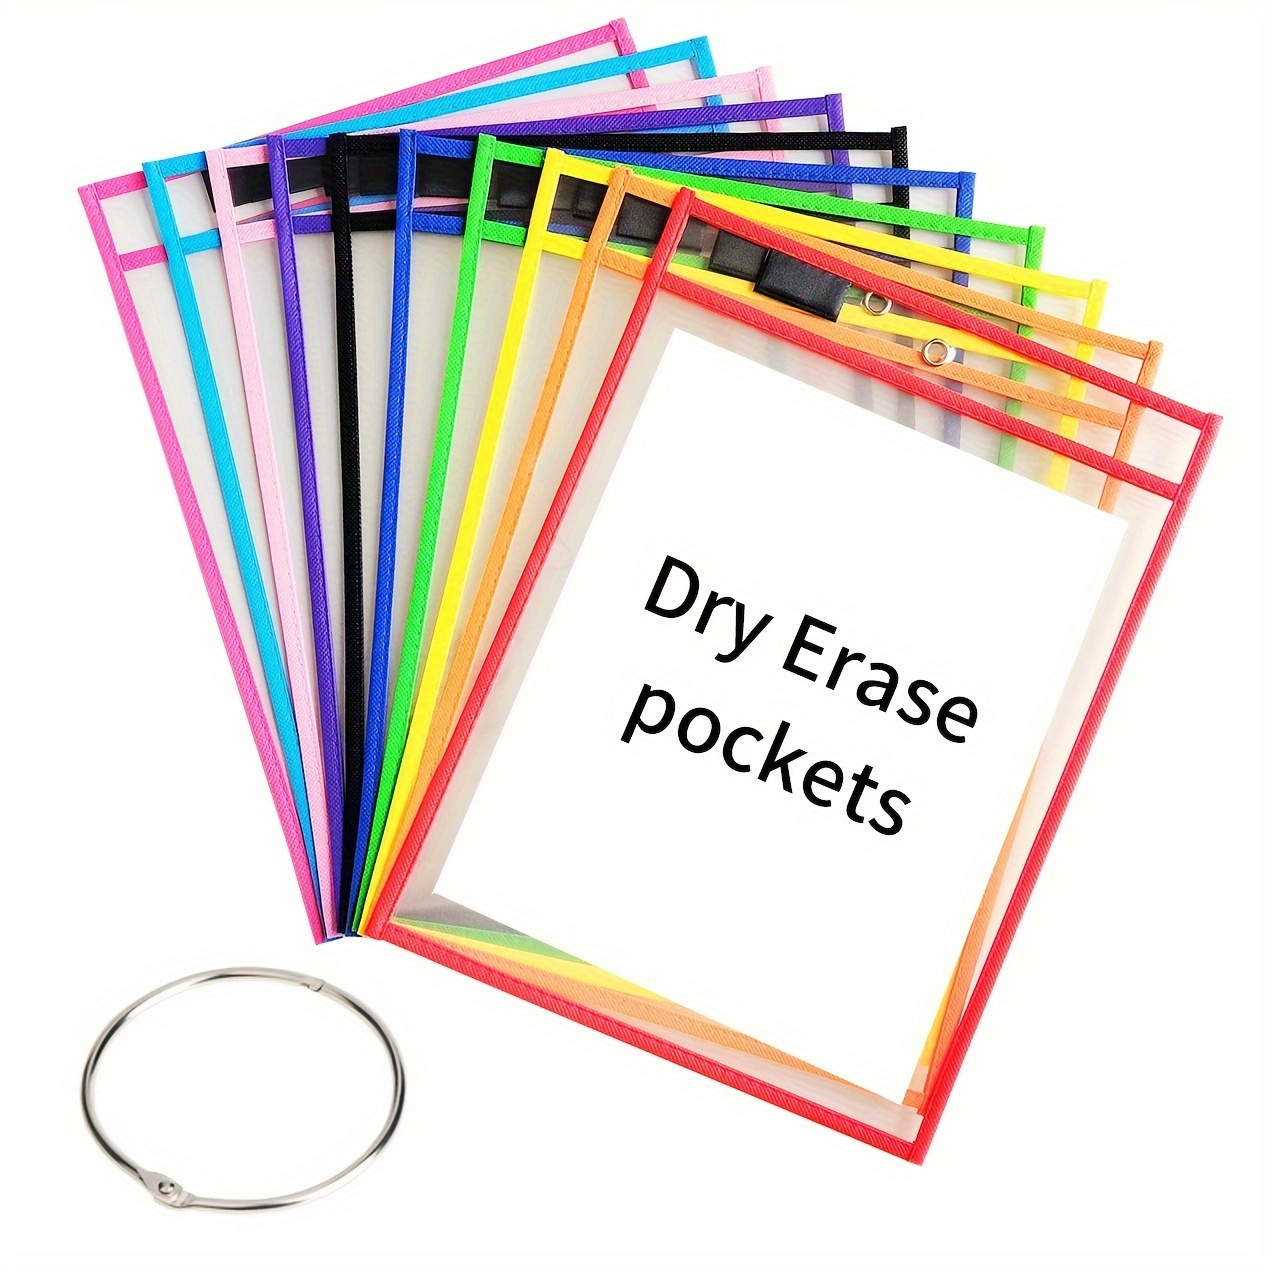 

6/10-piece Large Dry Erase Pouches With Binding Rings - Reusable, Clear Plastic Writing & Display Sleeves For Classroom And Art Projects